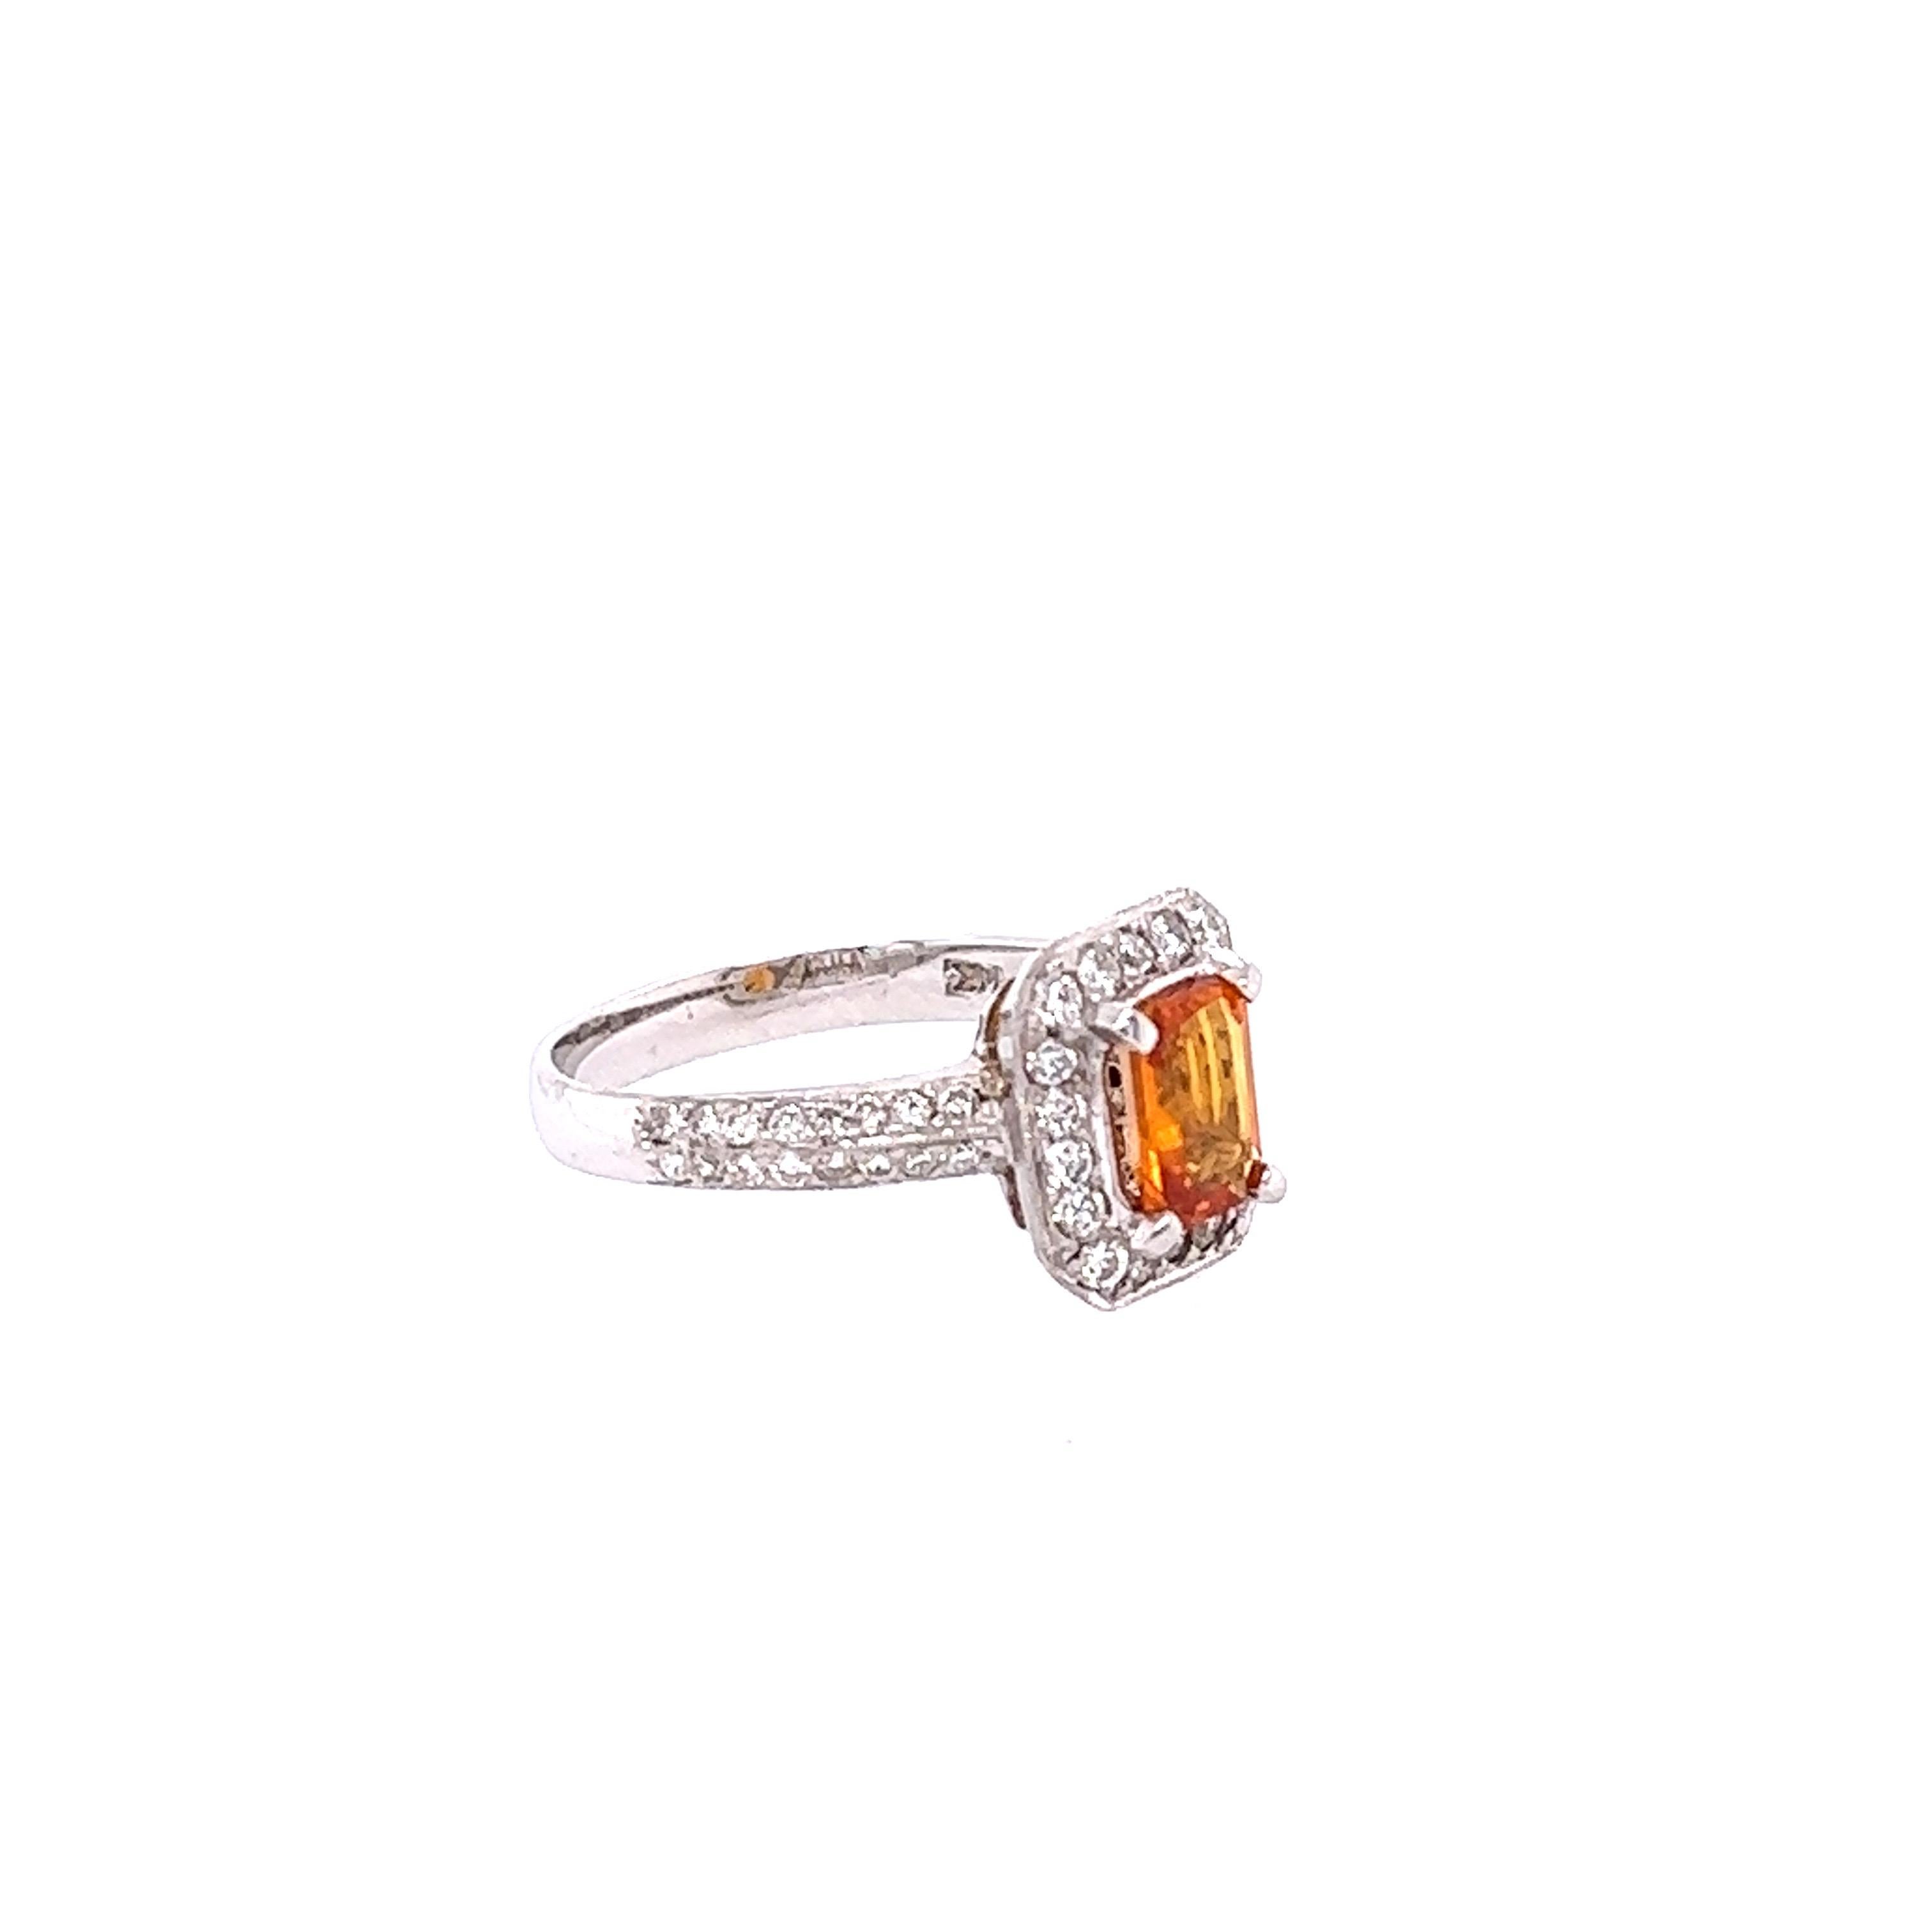 This beautiful ring has Natural Emerald Cut Orange Sapphire that weighs 1.16 Carats and is surrounded by 50 Round Cut Diamonds that weigh 1.64 Carats. The total carat weight of the ring is 2.80 Carats. 

The ring is beautifully set in a classic 14